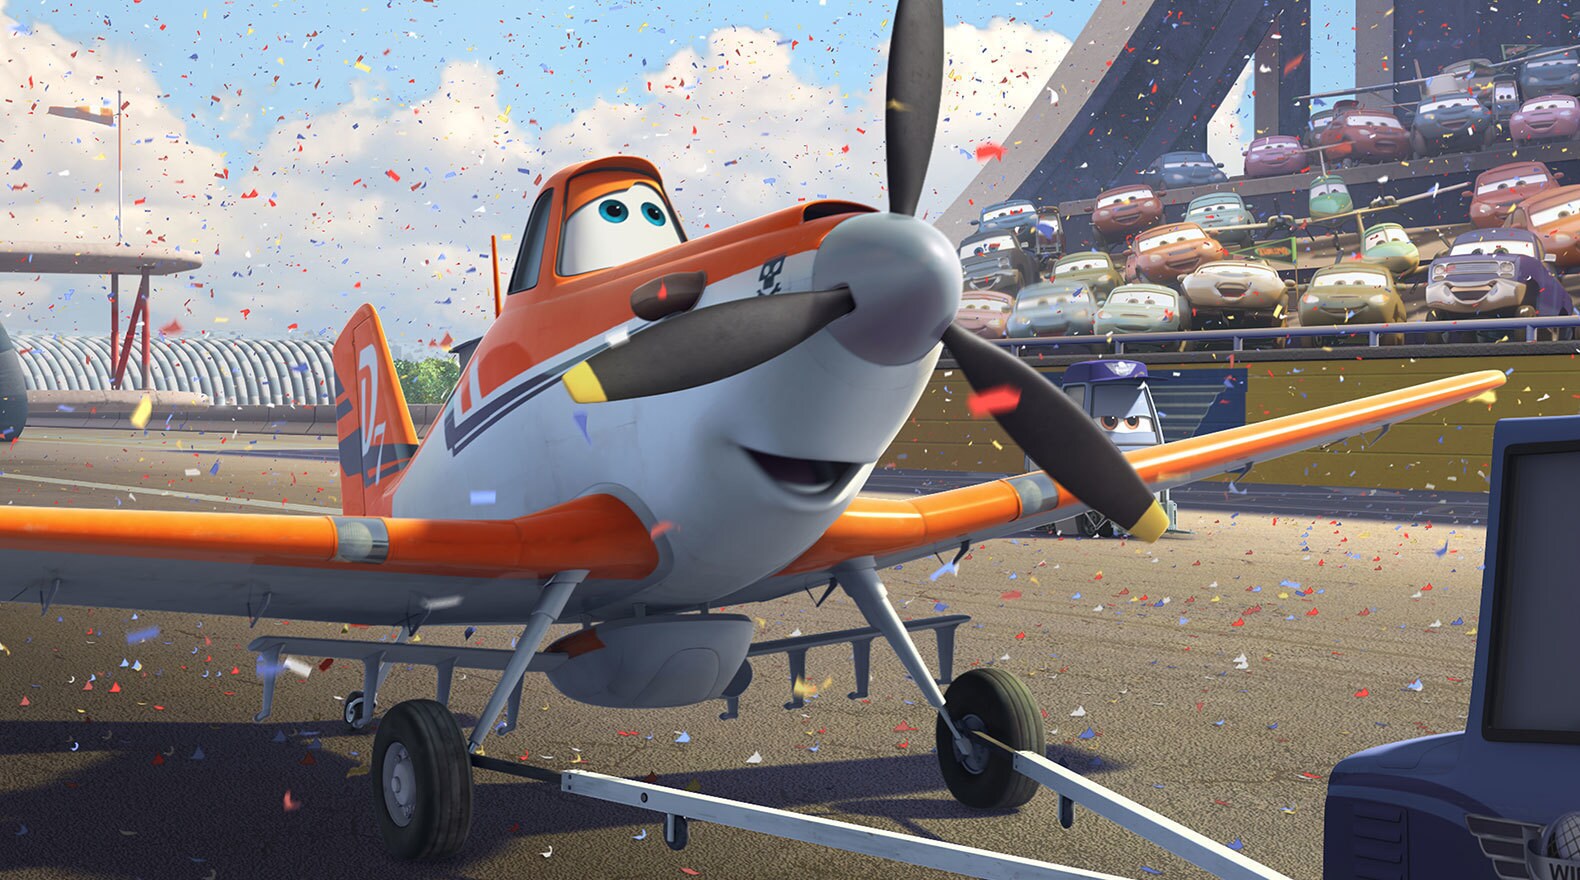 From crop duster to racer, Dusty is in the big leagues now! From the movie "Planes"